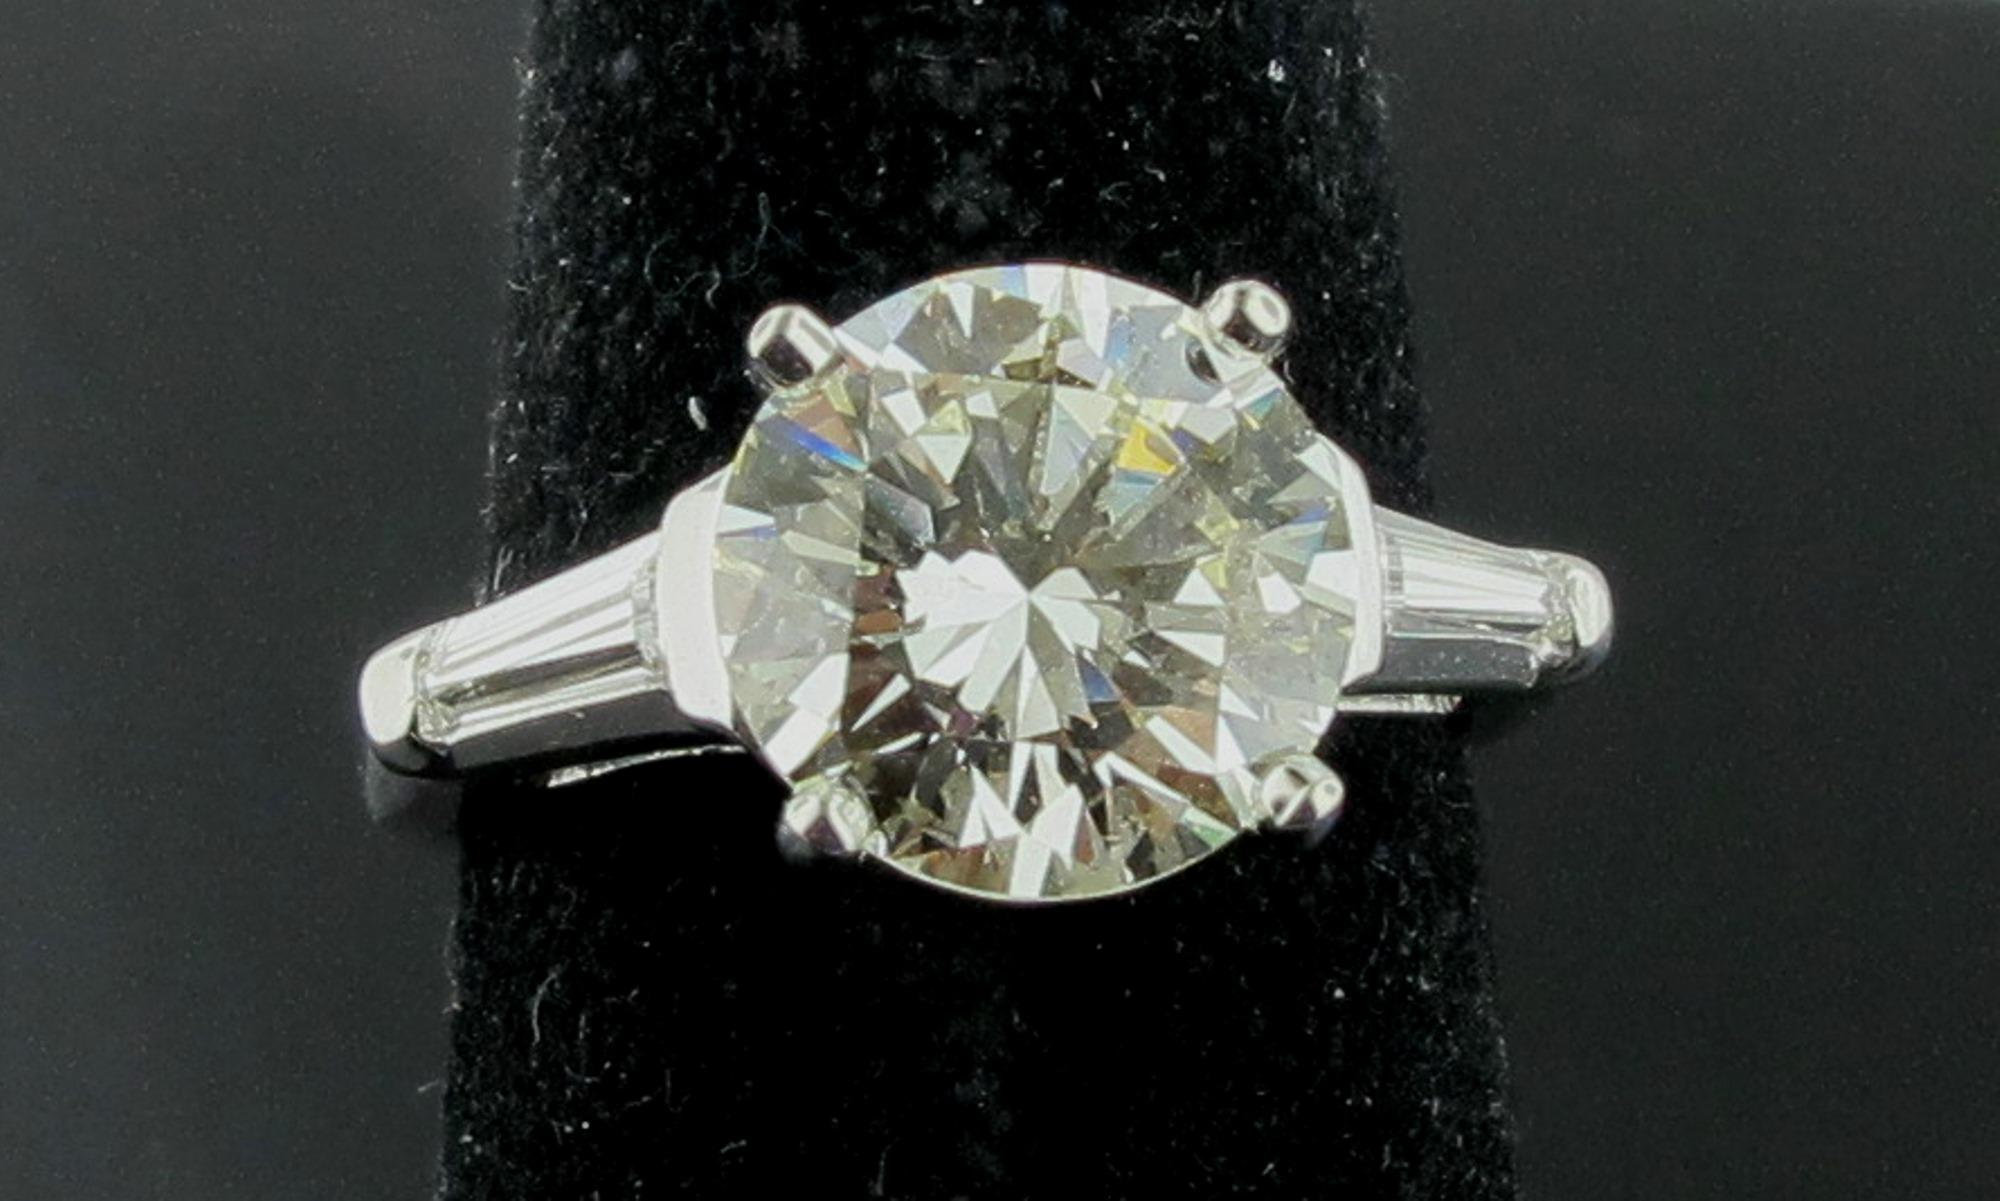 Set in Platinum is a 3.75 carat round brilliant cut diamond, Color K, Clarity VS-2.  Included are two Baguettes with a weight of 0.30 carats.  Ring size is 7. 